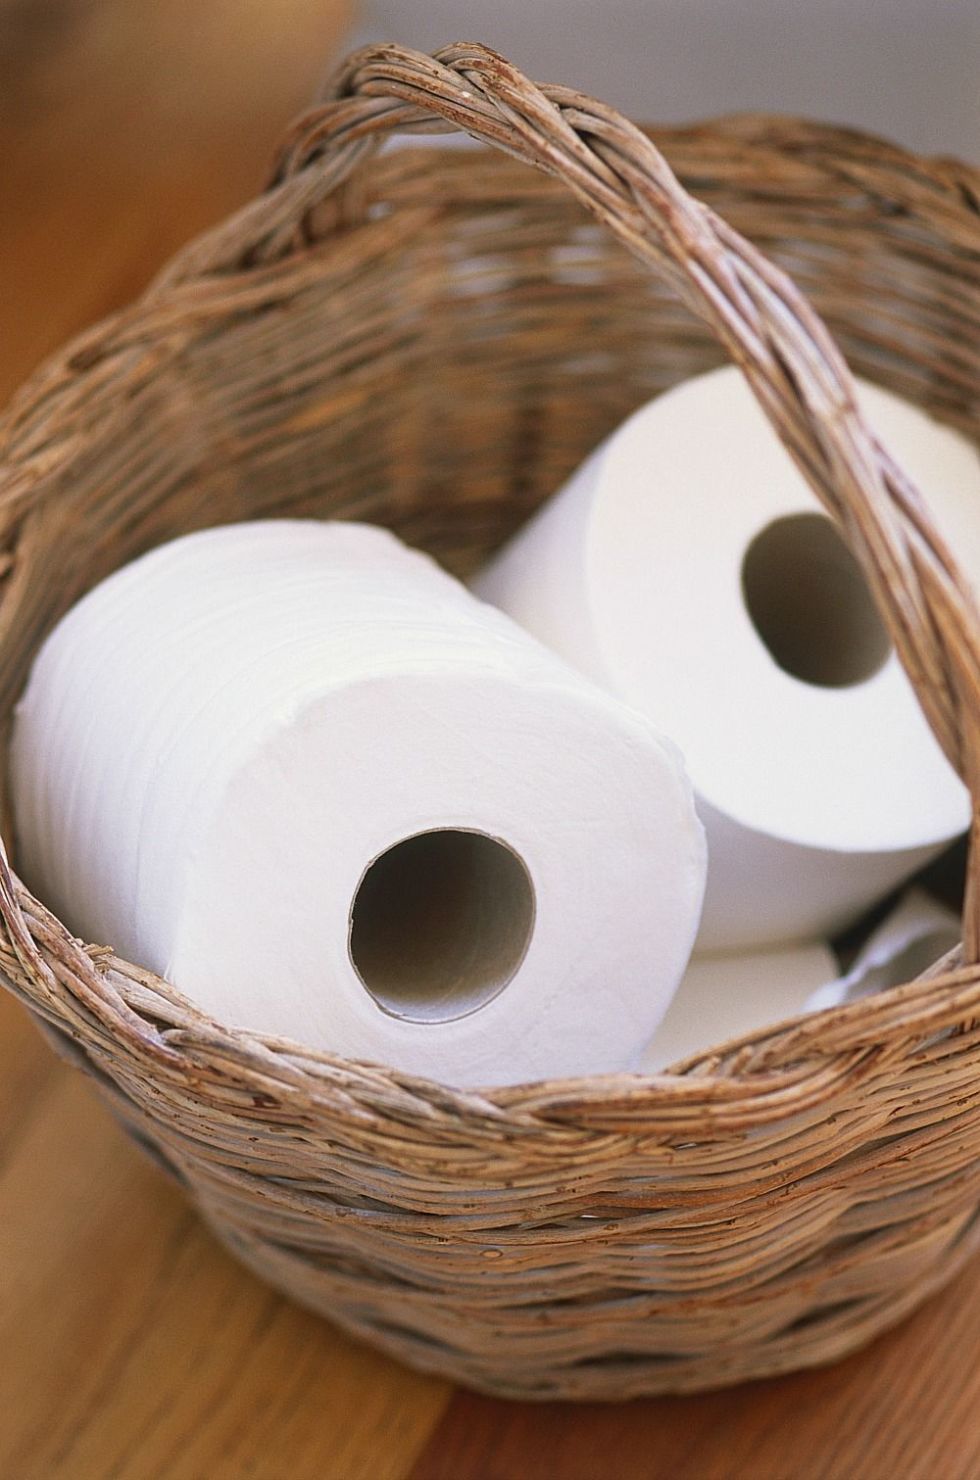 15 Household Items That You Should Buy in Bulk